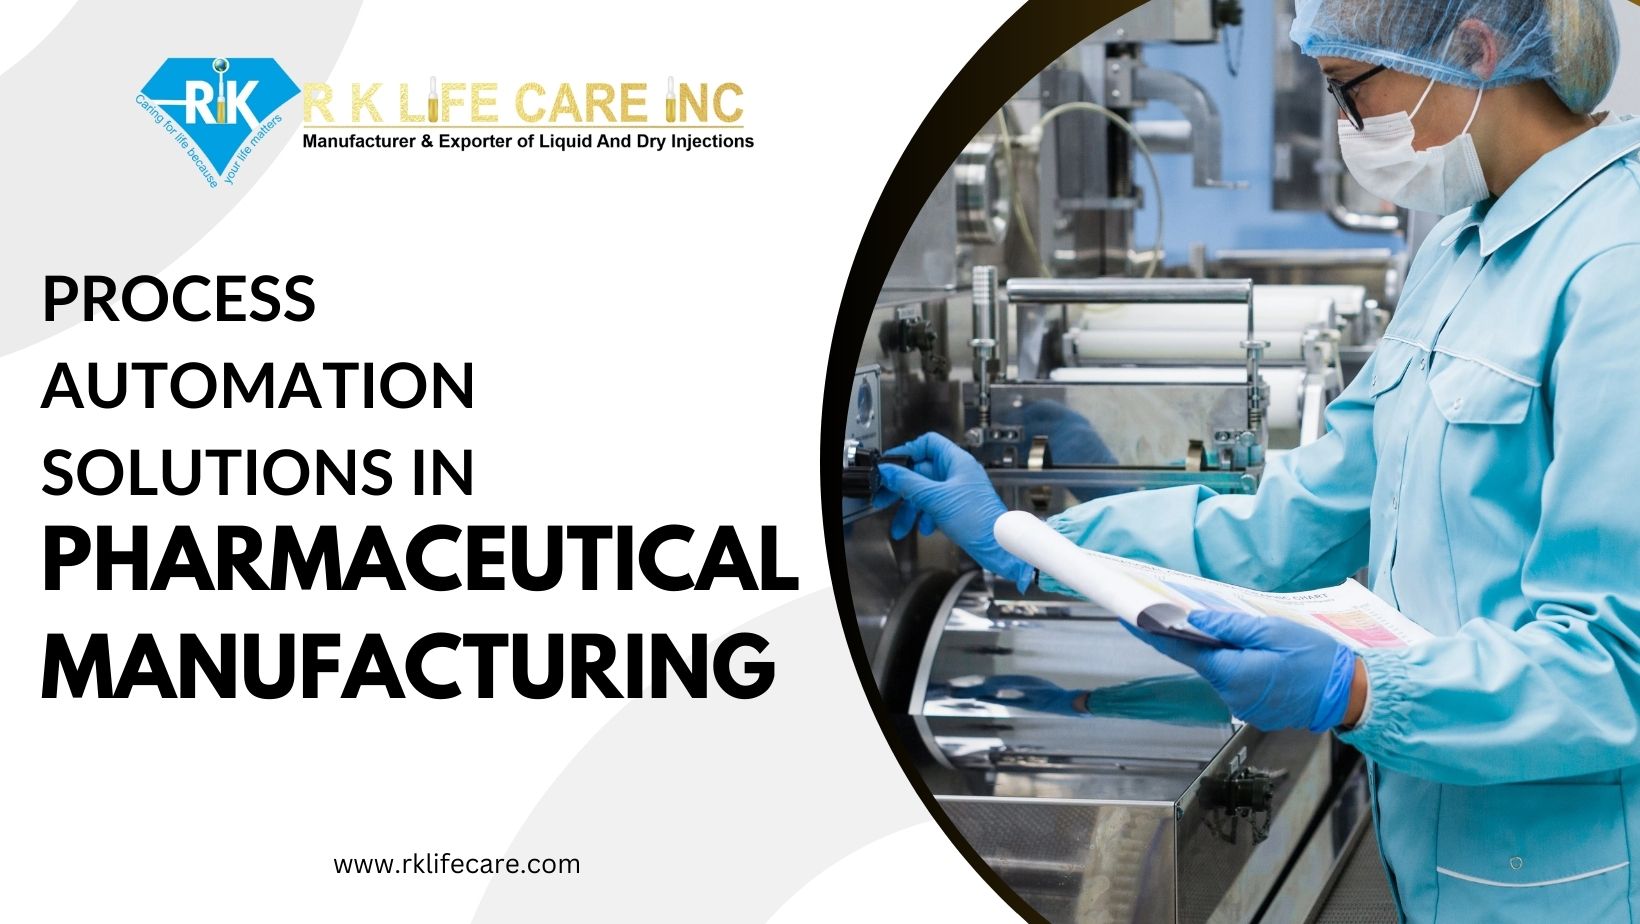 Process Automation Solutions in Pharmaceutical Manufacturing